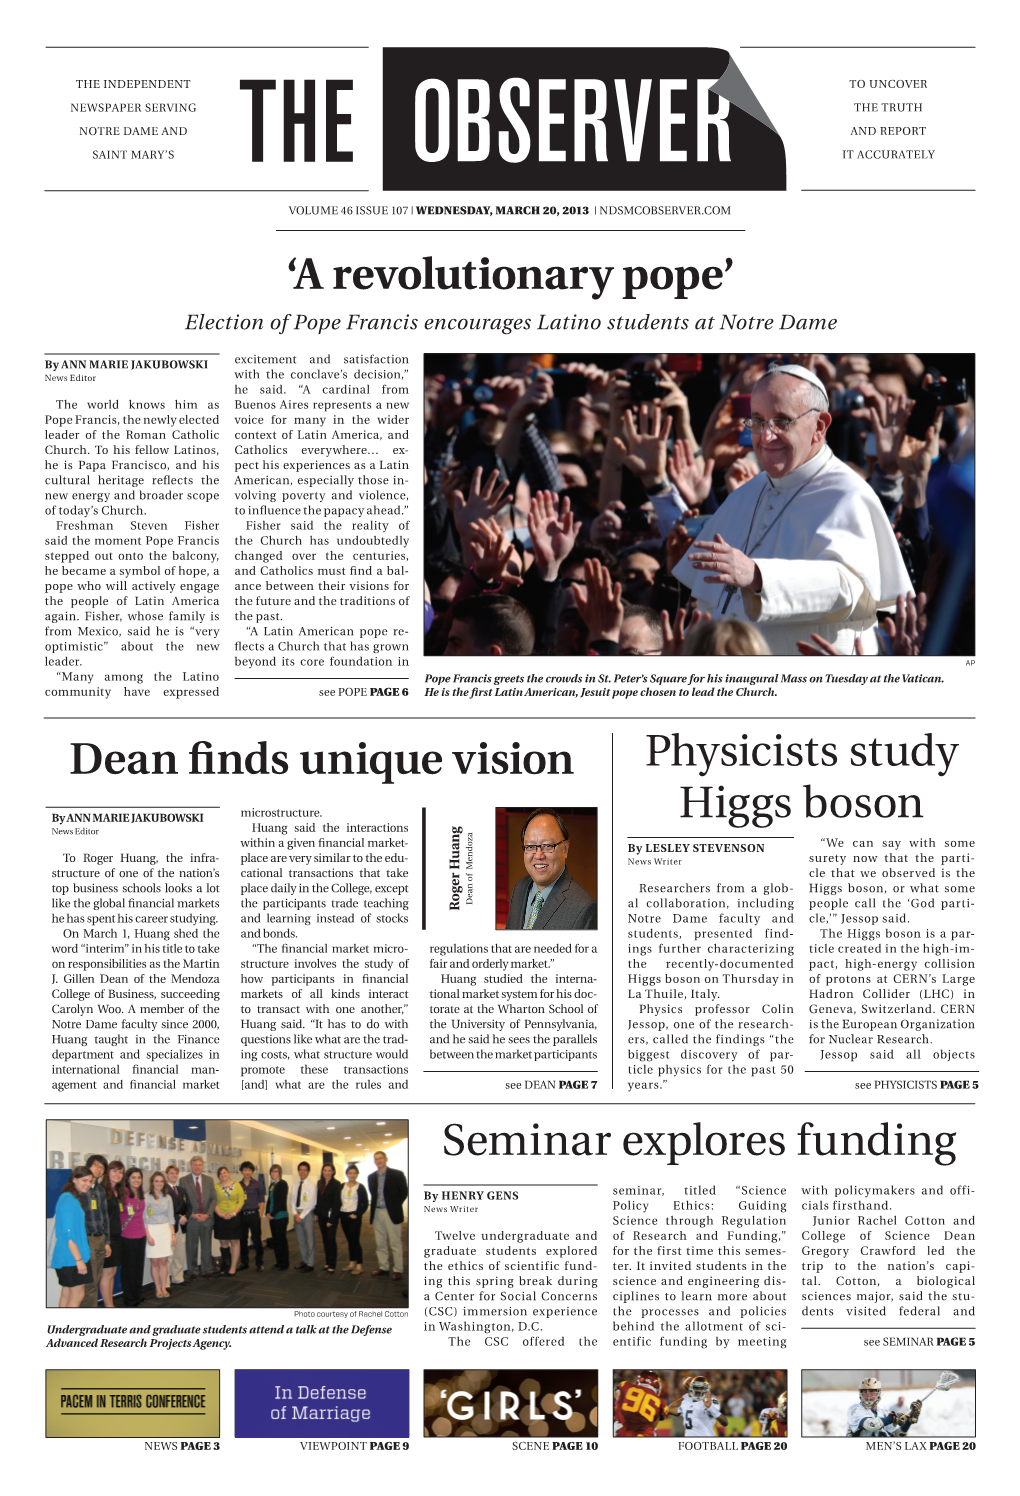 A Revolutionary Pope’ Election of Pope Francis Encourages Latino Students at Notre Dame